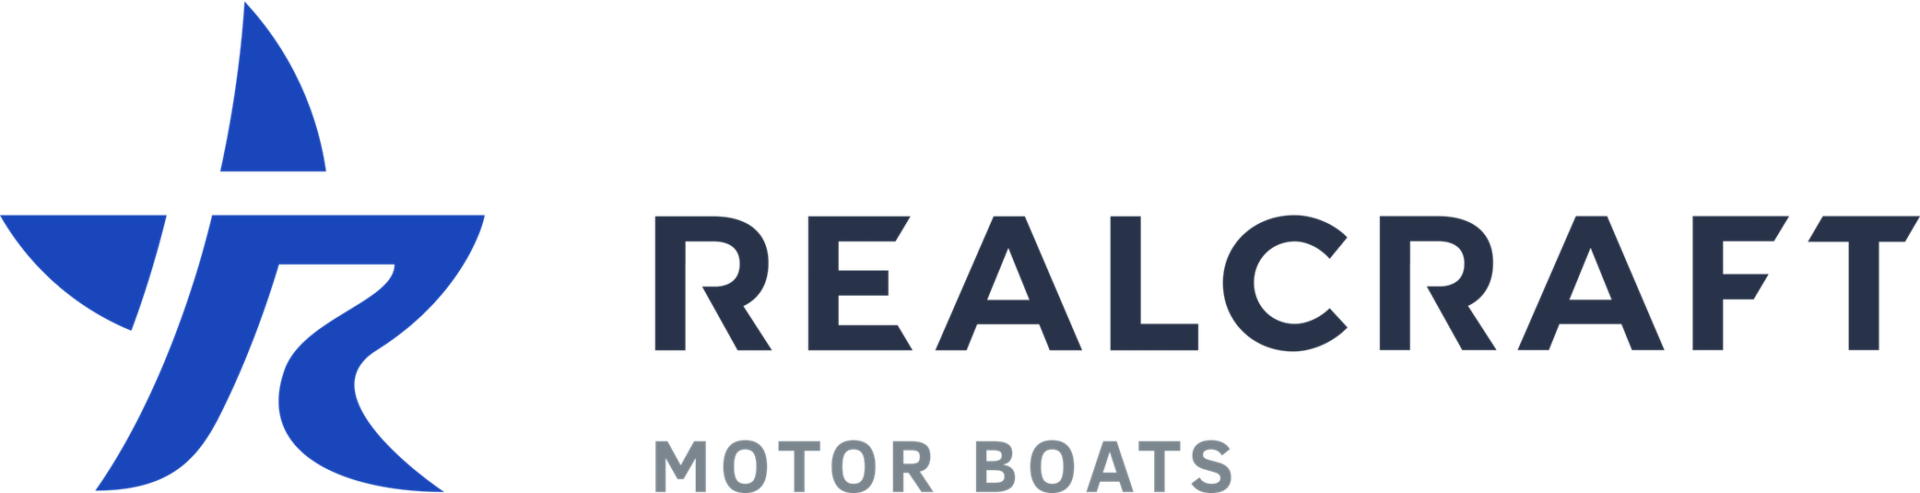 Realcraft_logo_Colorful_5000_clear